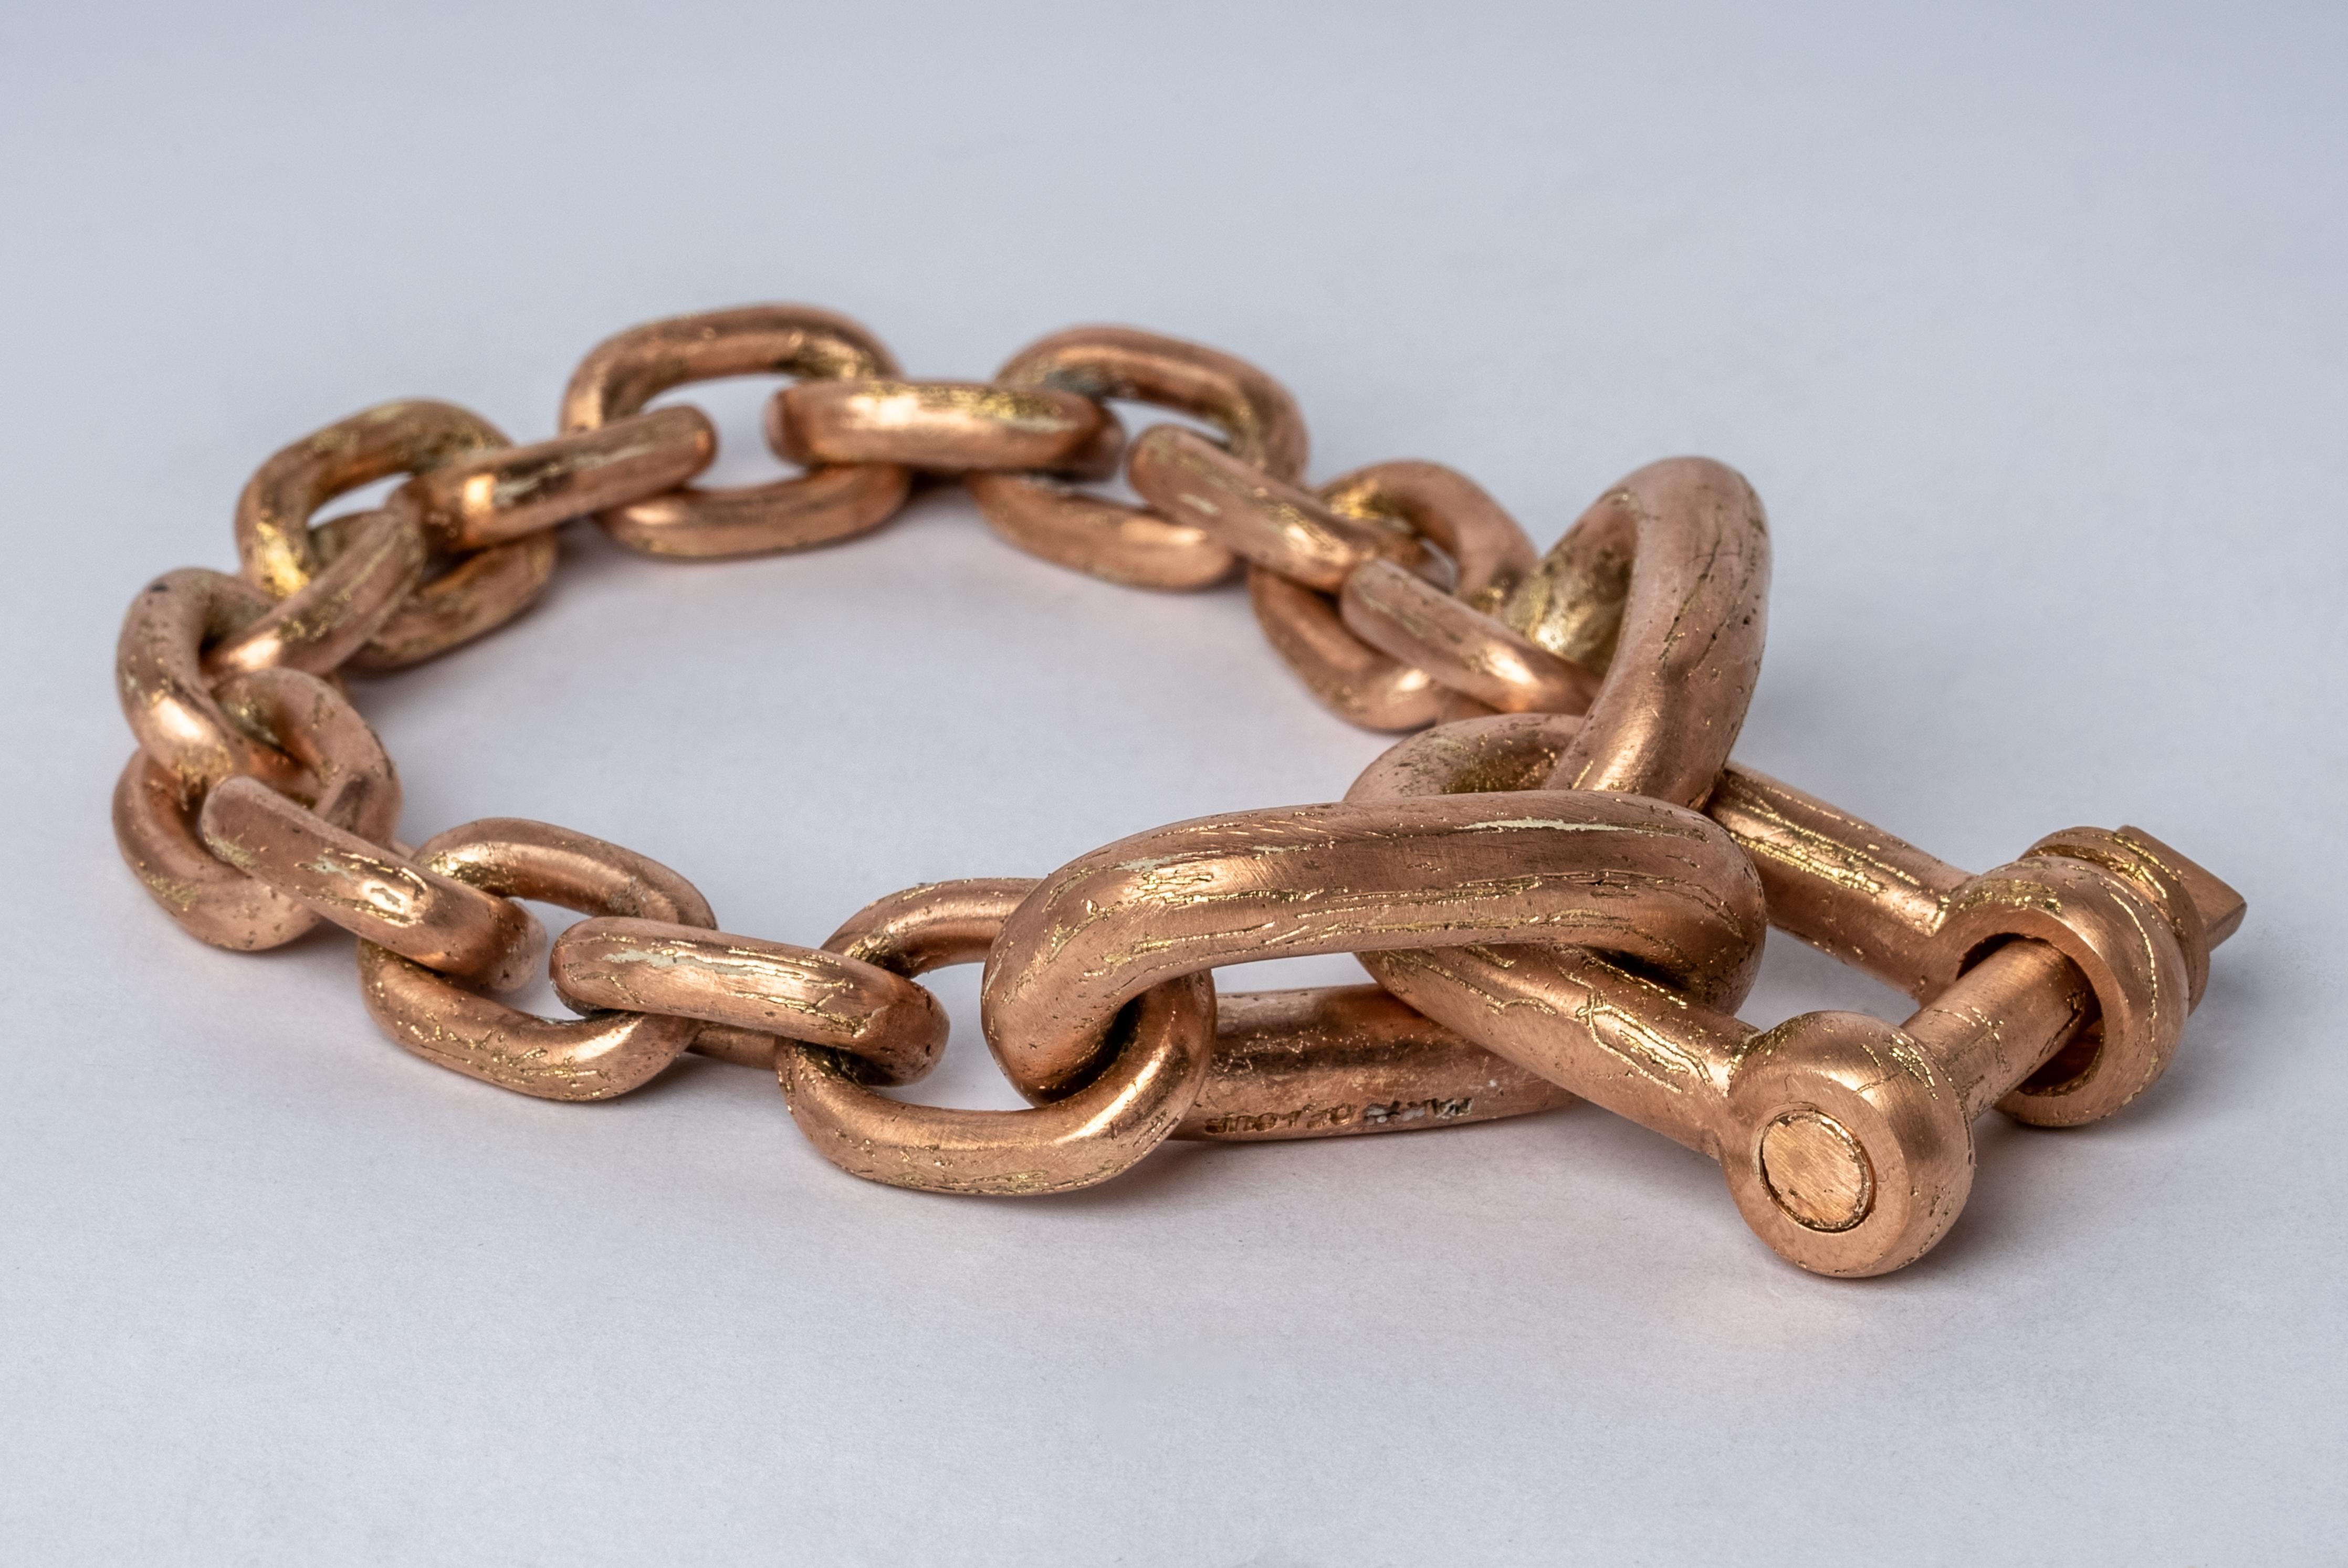 Chain charm bracelet made in brass. Brass substrate is electroplated with 18k Rose Gold and then dipped into acid to create the subtly destroyed surface. The Charm System is an interrelated group of products that can be mixed and matched or worn